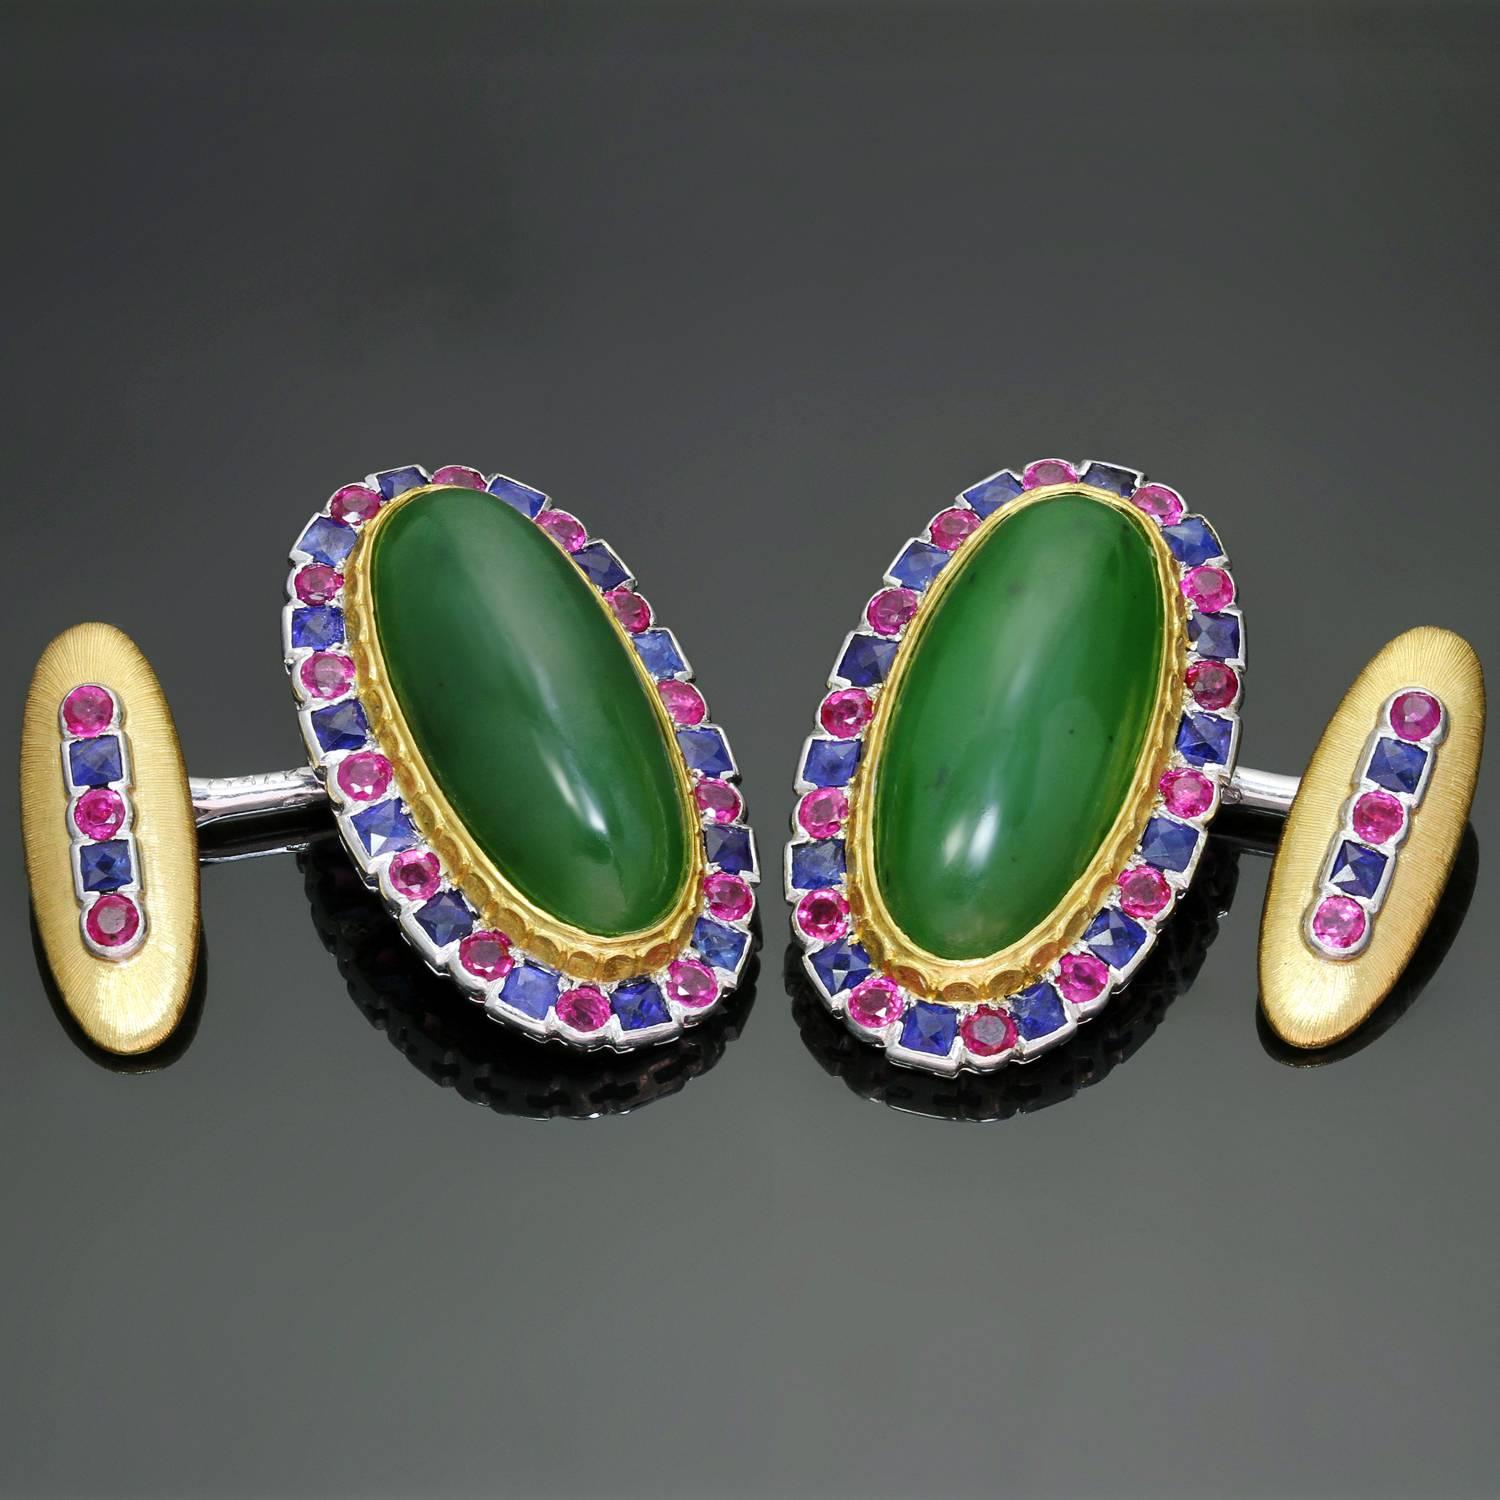 These stunning Buccellati cufflinks are crafted in 18k yellow and white gold and set with vibrant oval nephrite cabochons framed by sparkling square sapphires and round rubies. The overall wear is minor and consistent with age. Made in Italy circa